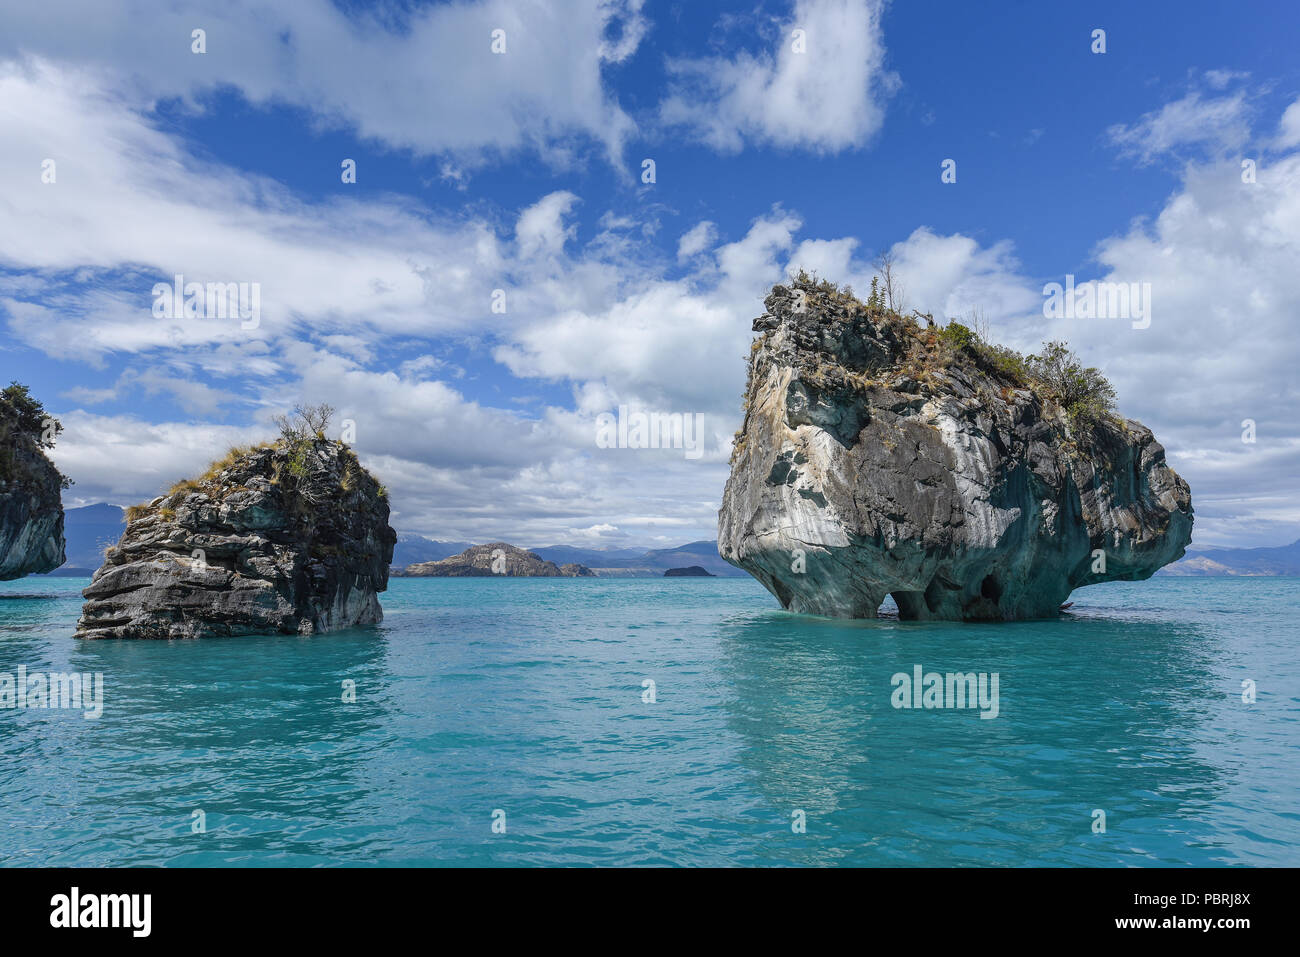 Page 14 - Carrera Lake High Resolution Stock Photography and Images - Alamy